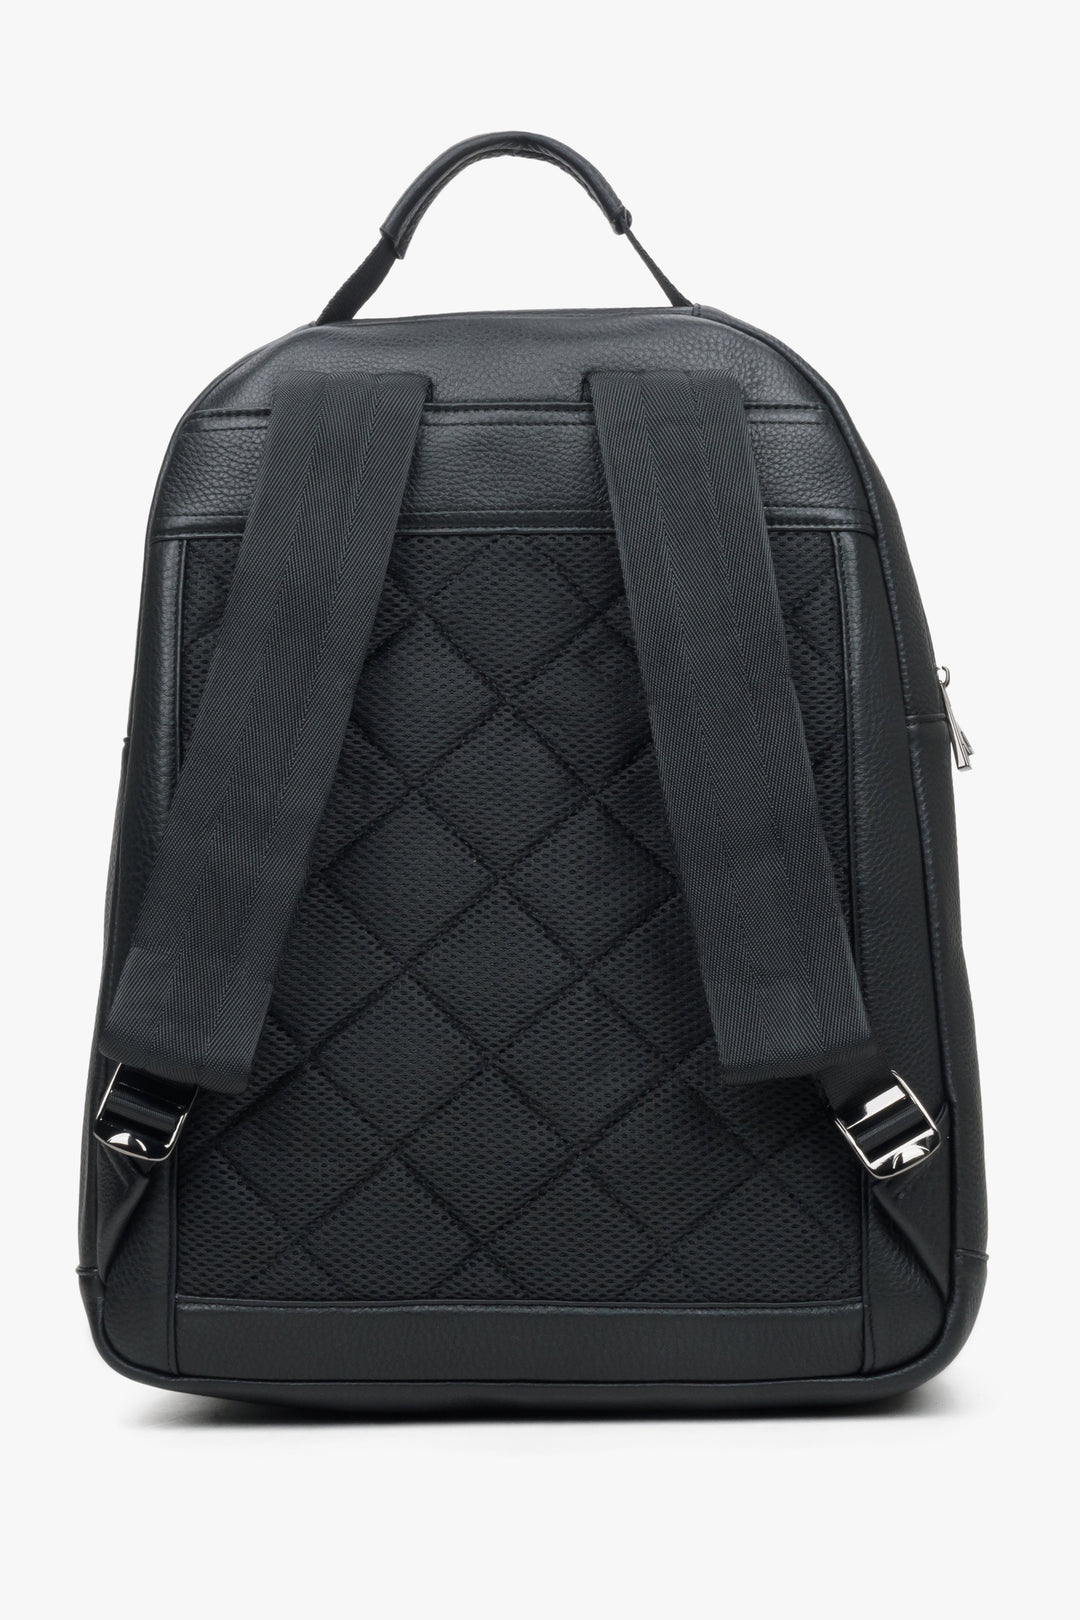 A men's leather backpack from ES8 - back of the model.